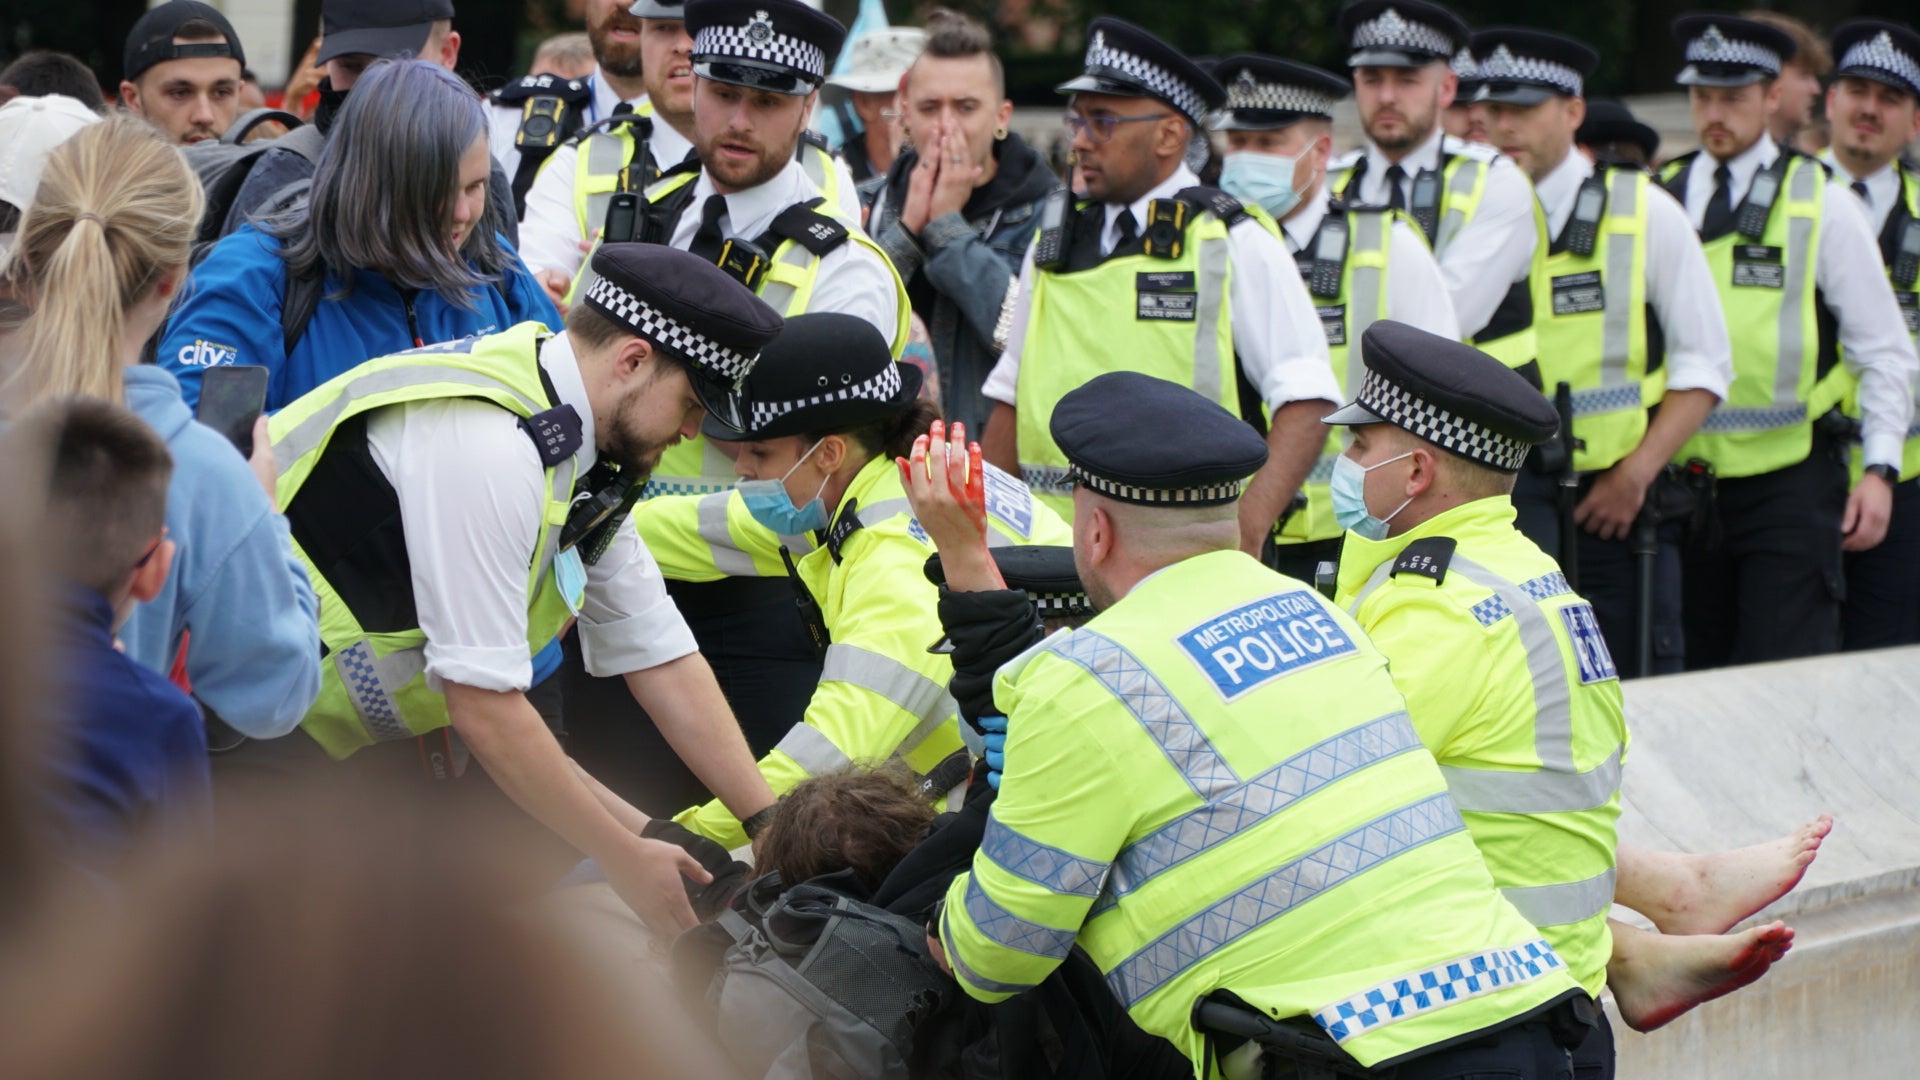 The basic mission of the police, according to Sir Robert Peel, the founding father of British policing, is to ‘prevent crime and disorder’, not simply to respond to crime and catch criminals